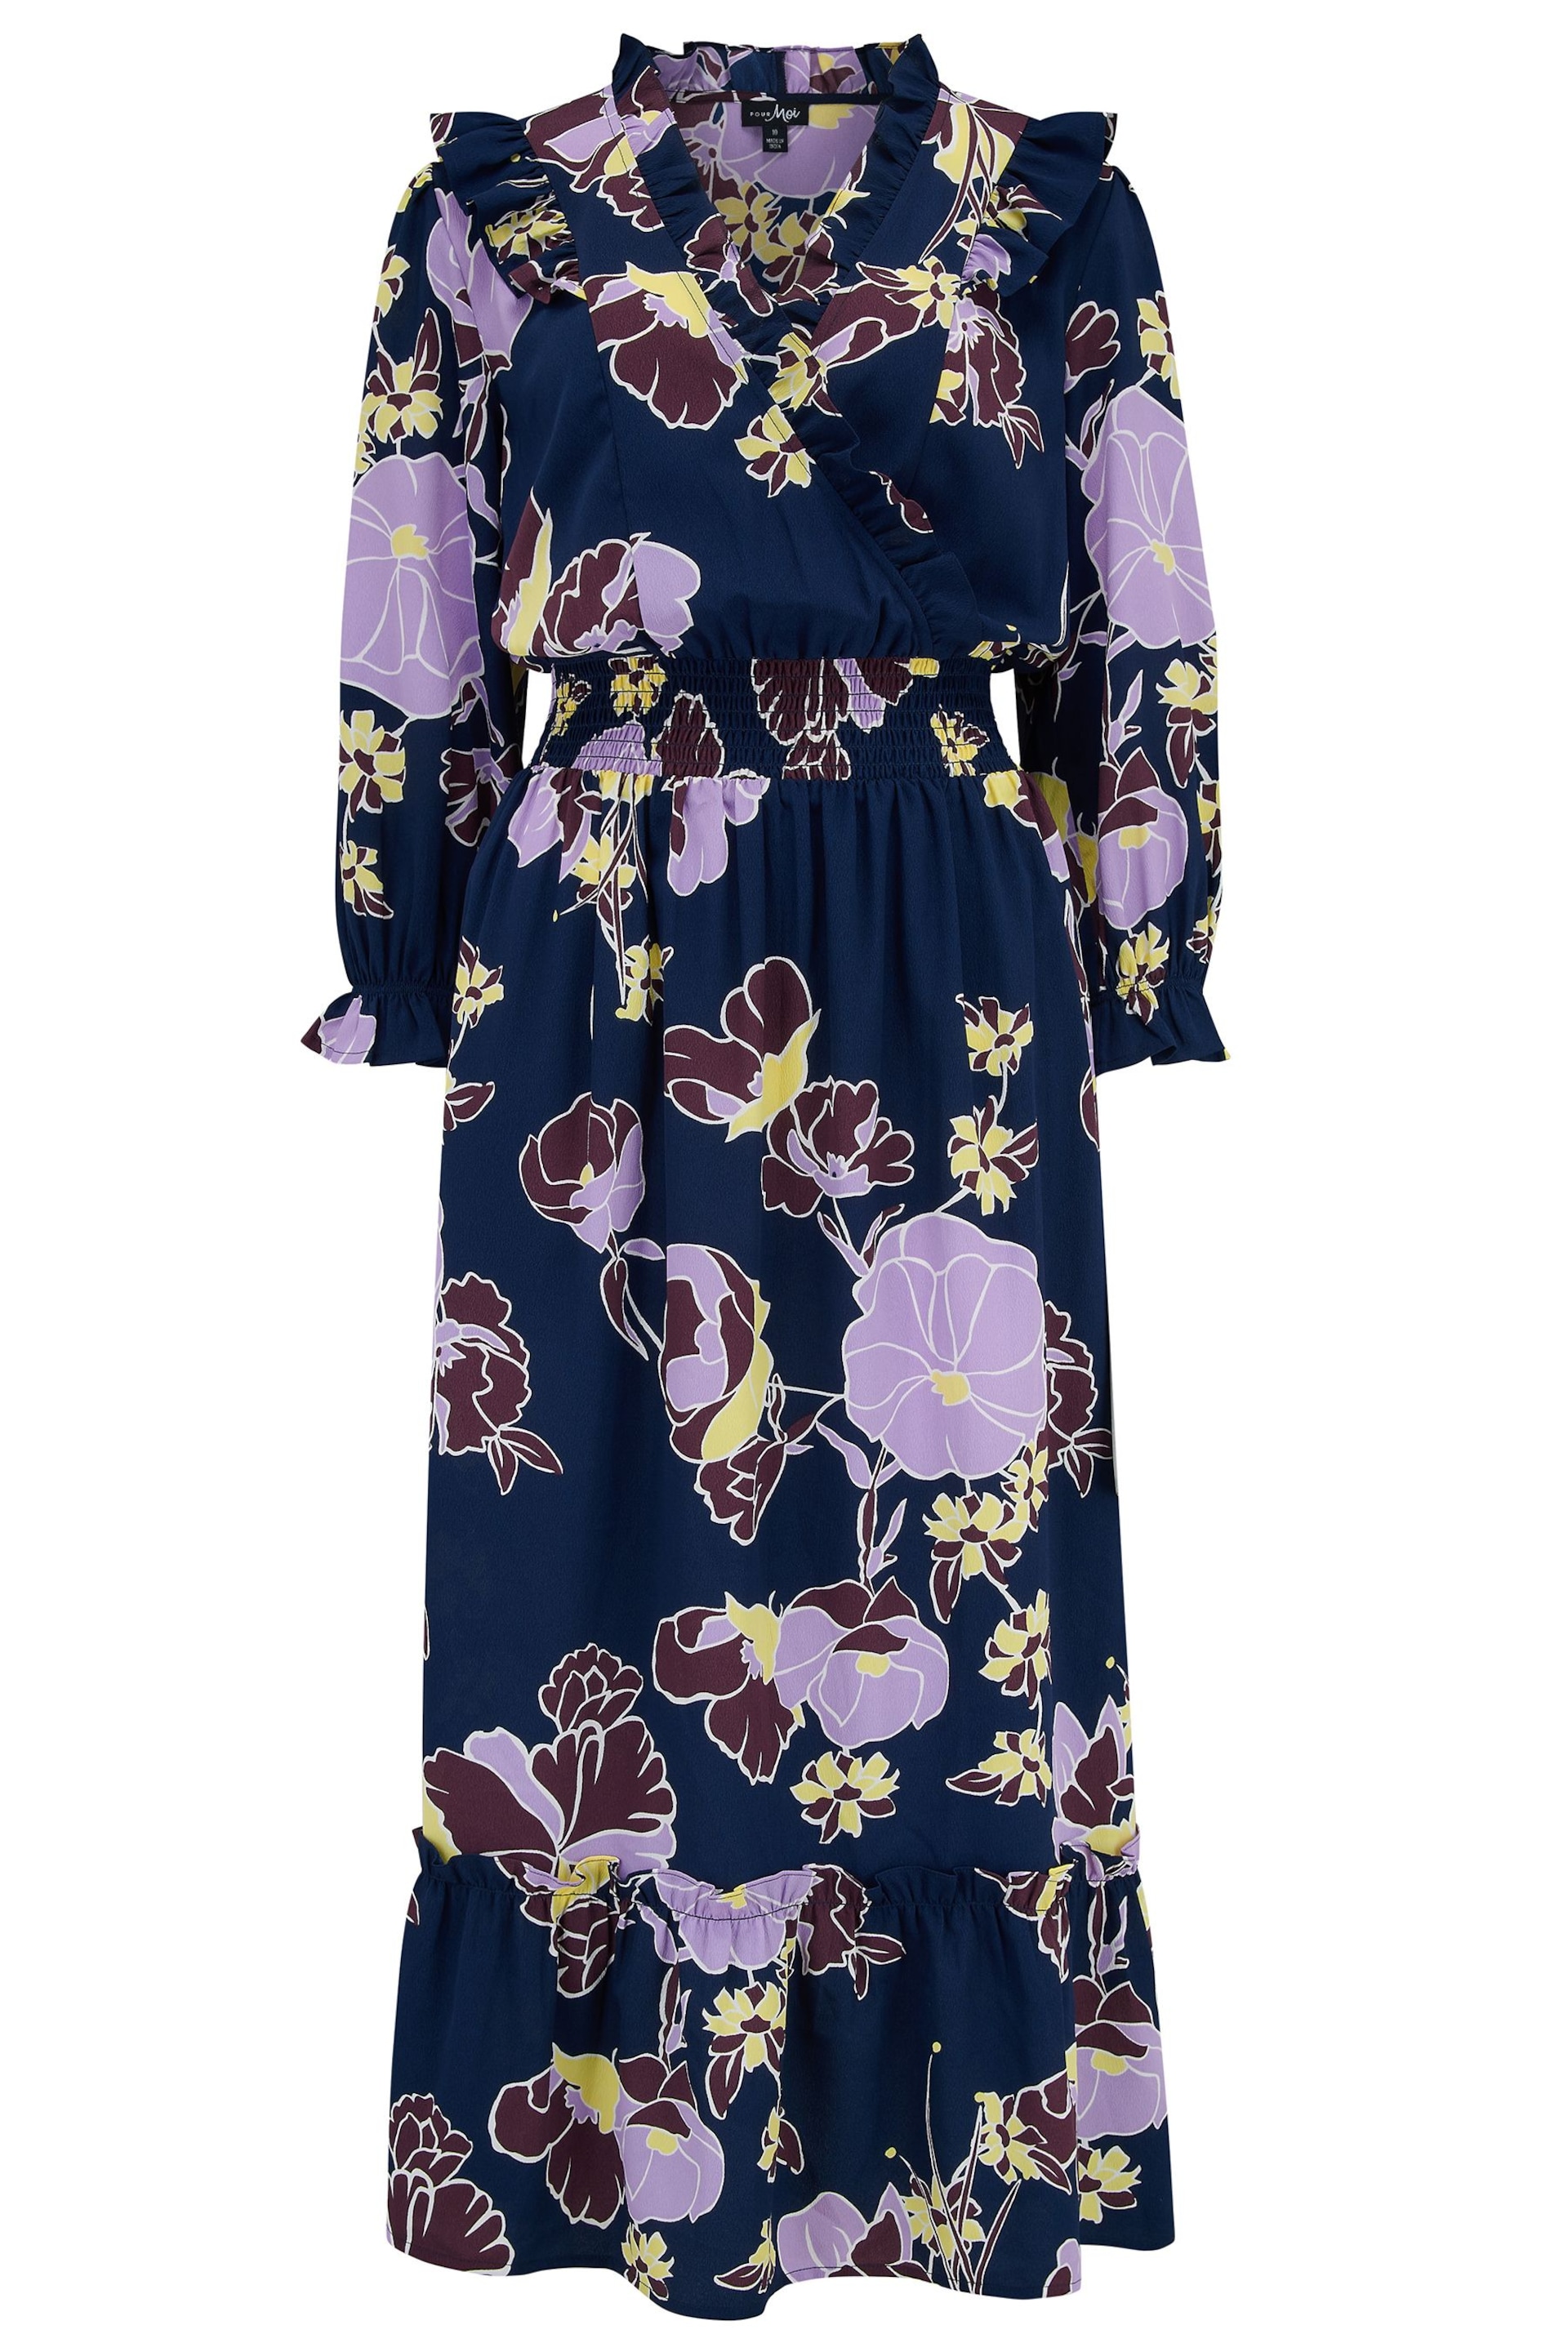 Pour Moi Navy Floral Print Maggie Recycled Dress - Image 4 of 5